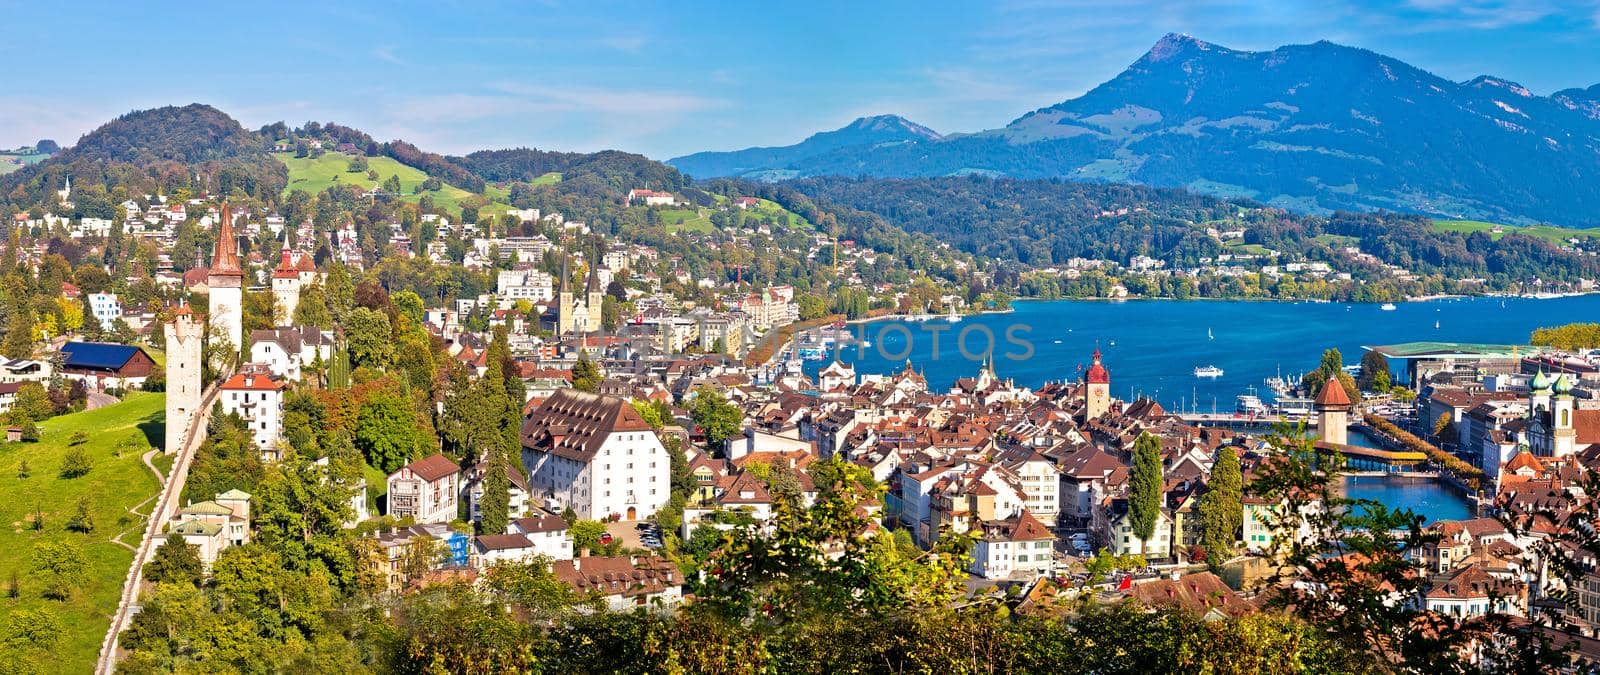 City and lake of Luzern panoramic view from the hill, Alps and lakes landscape of Switzerland
